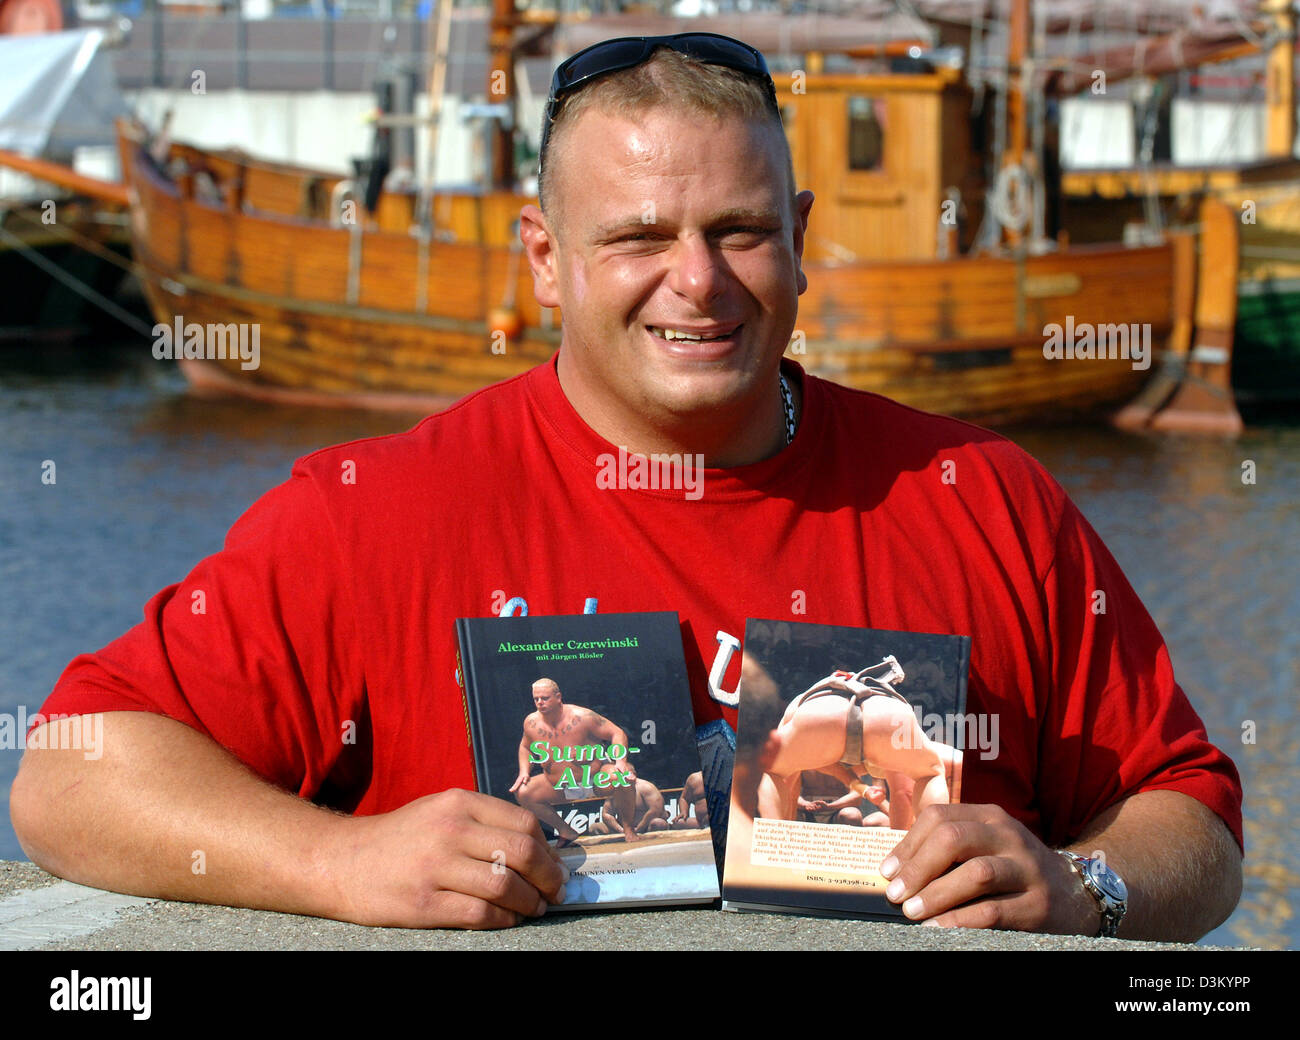 (dpa) - Former world champion in sumo wrestling Alexander Czerwinski presents his new book 'Sumo-Alex' in Rostock, Germany, Friday, 07 October 2005. 36-year old Czerwinski admitted during the book presentation that he had consumed doping drugs in his younger days. He is currently suspended by the German Sumo Association after having been tested positive for Nandrolon during a dopin Stock Photo